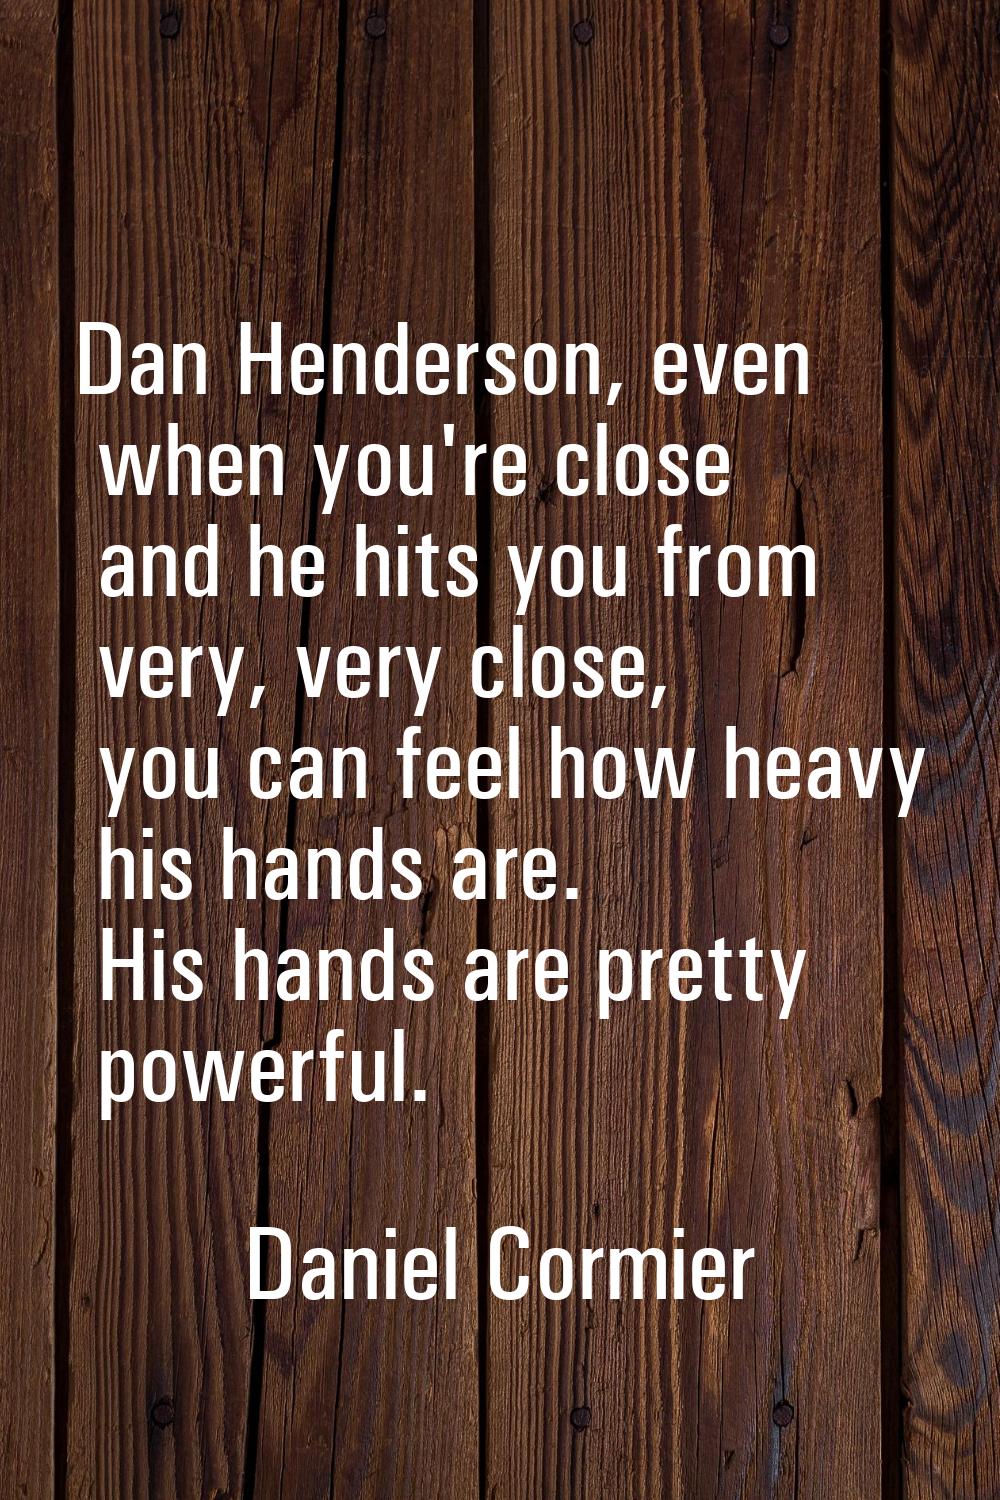 Dan Henderson, even when you're close and he hits you from very, very close, you can feel how heavy